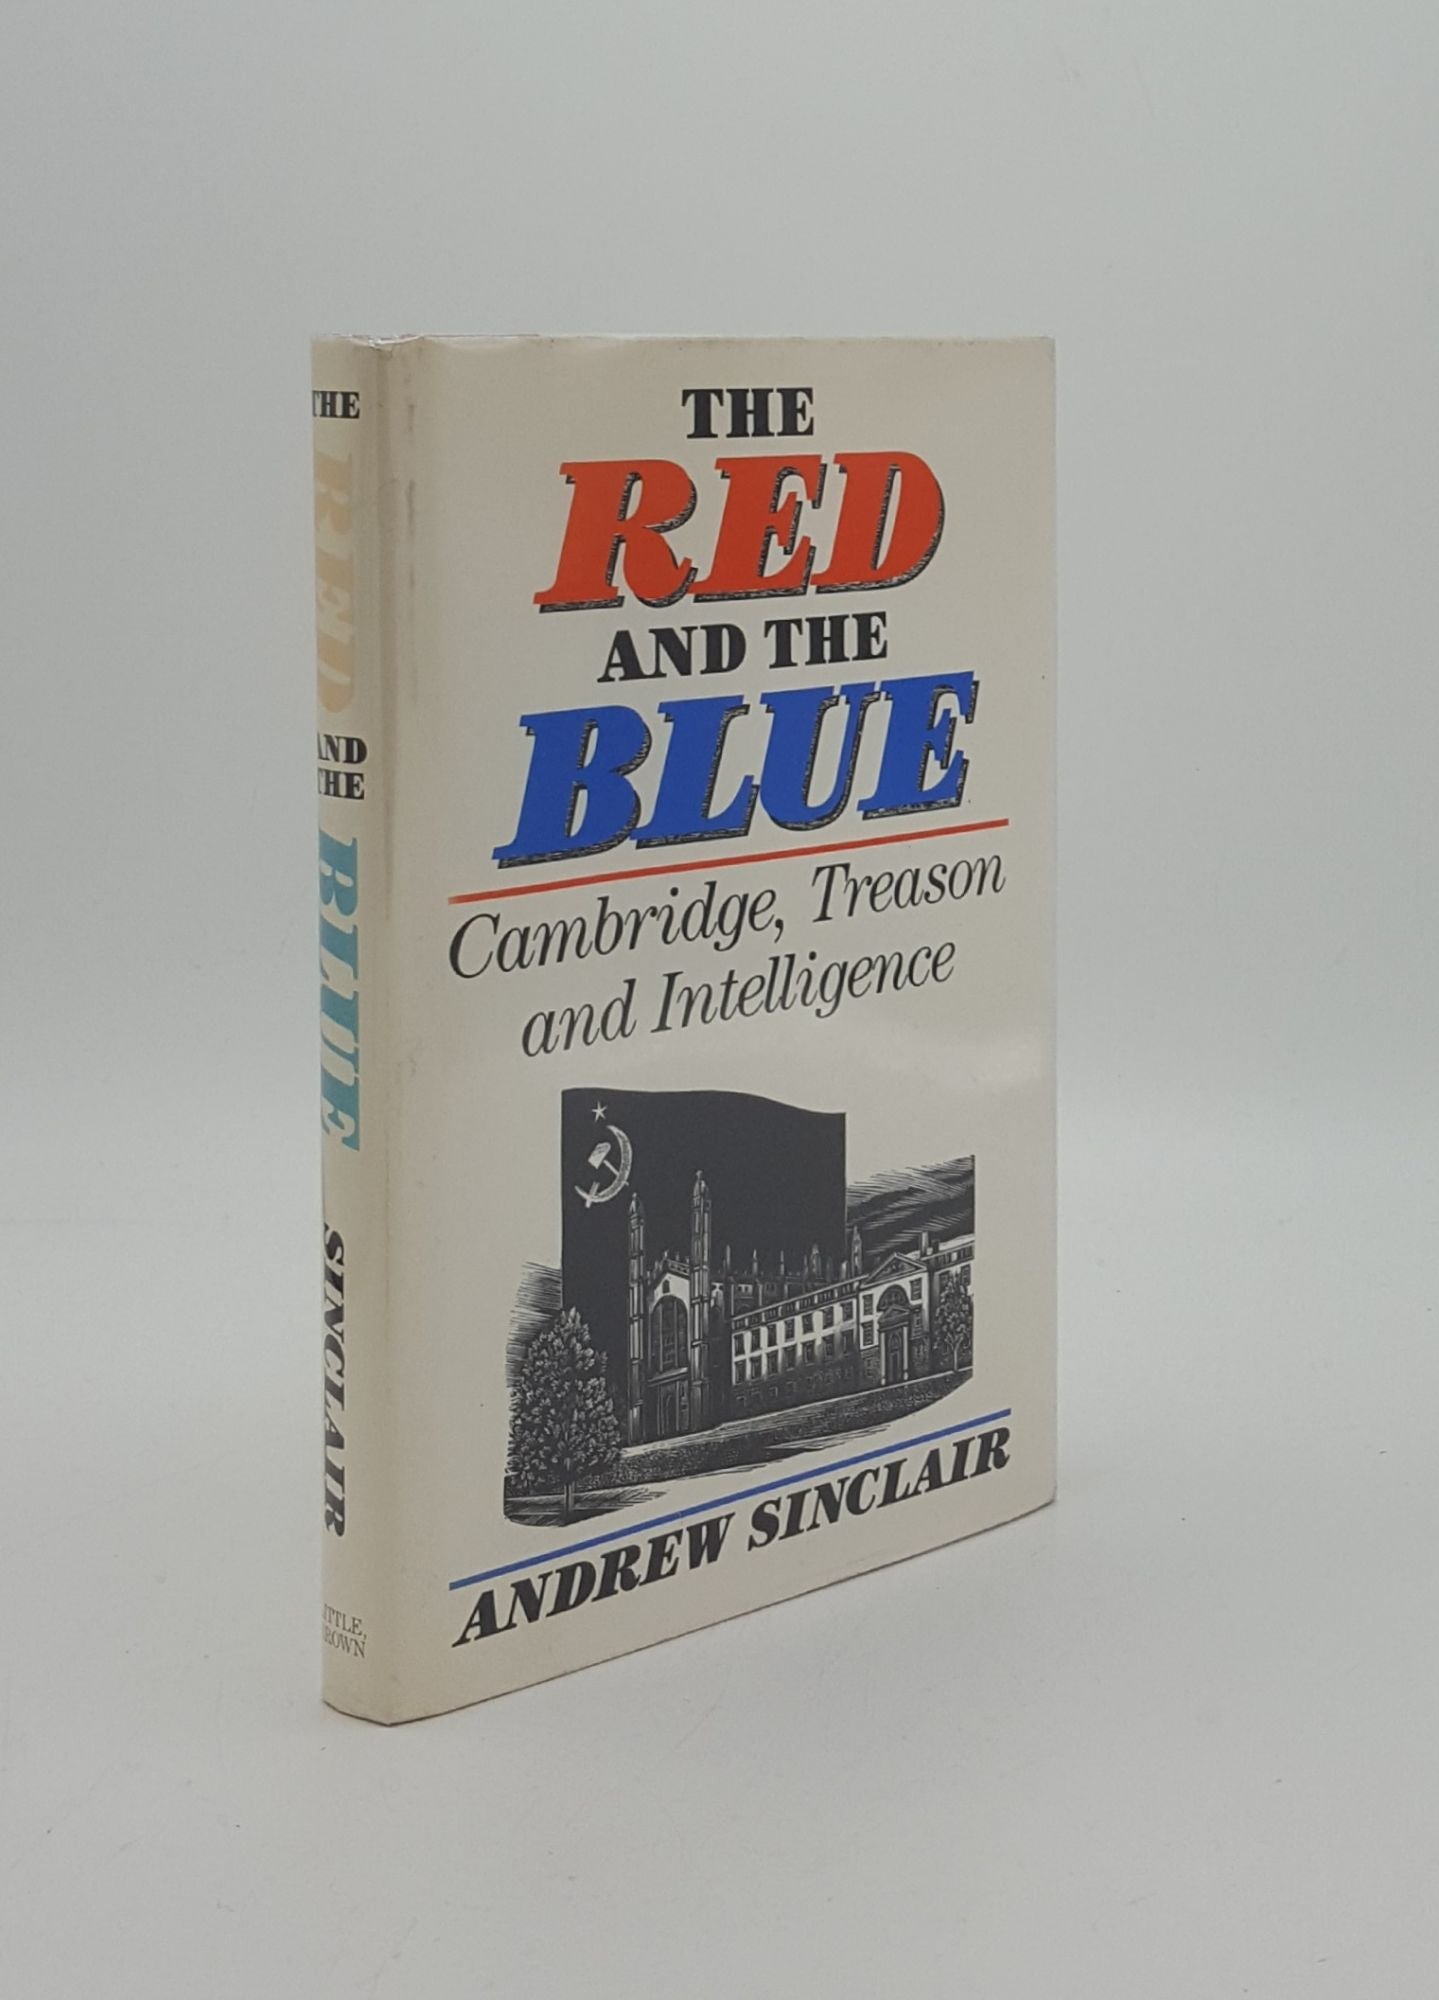 SINCLAIR Andrew - The Red and the Blue Cambridge Treason and Intelligence